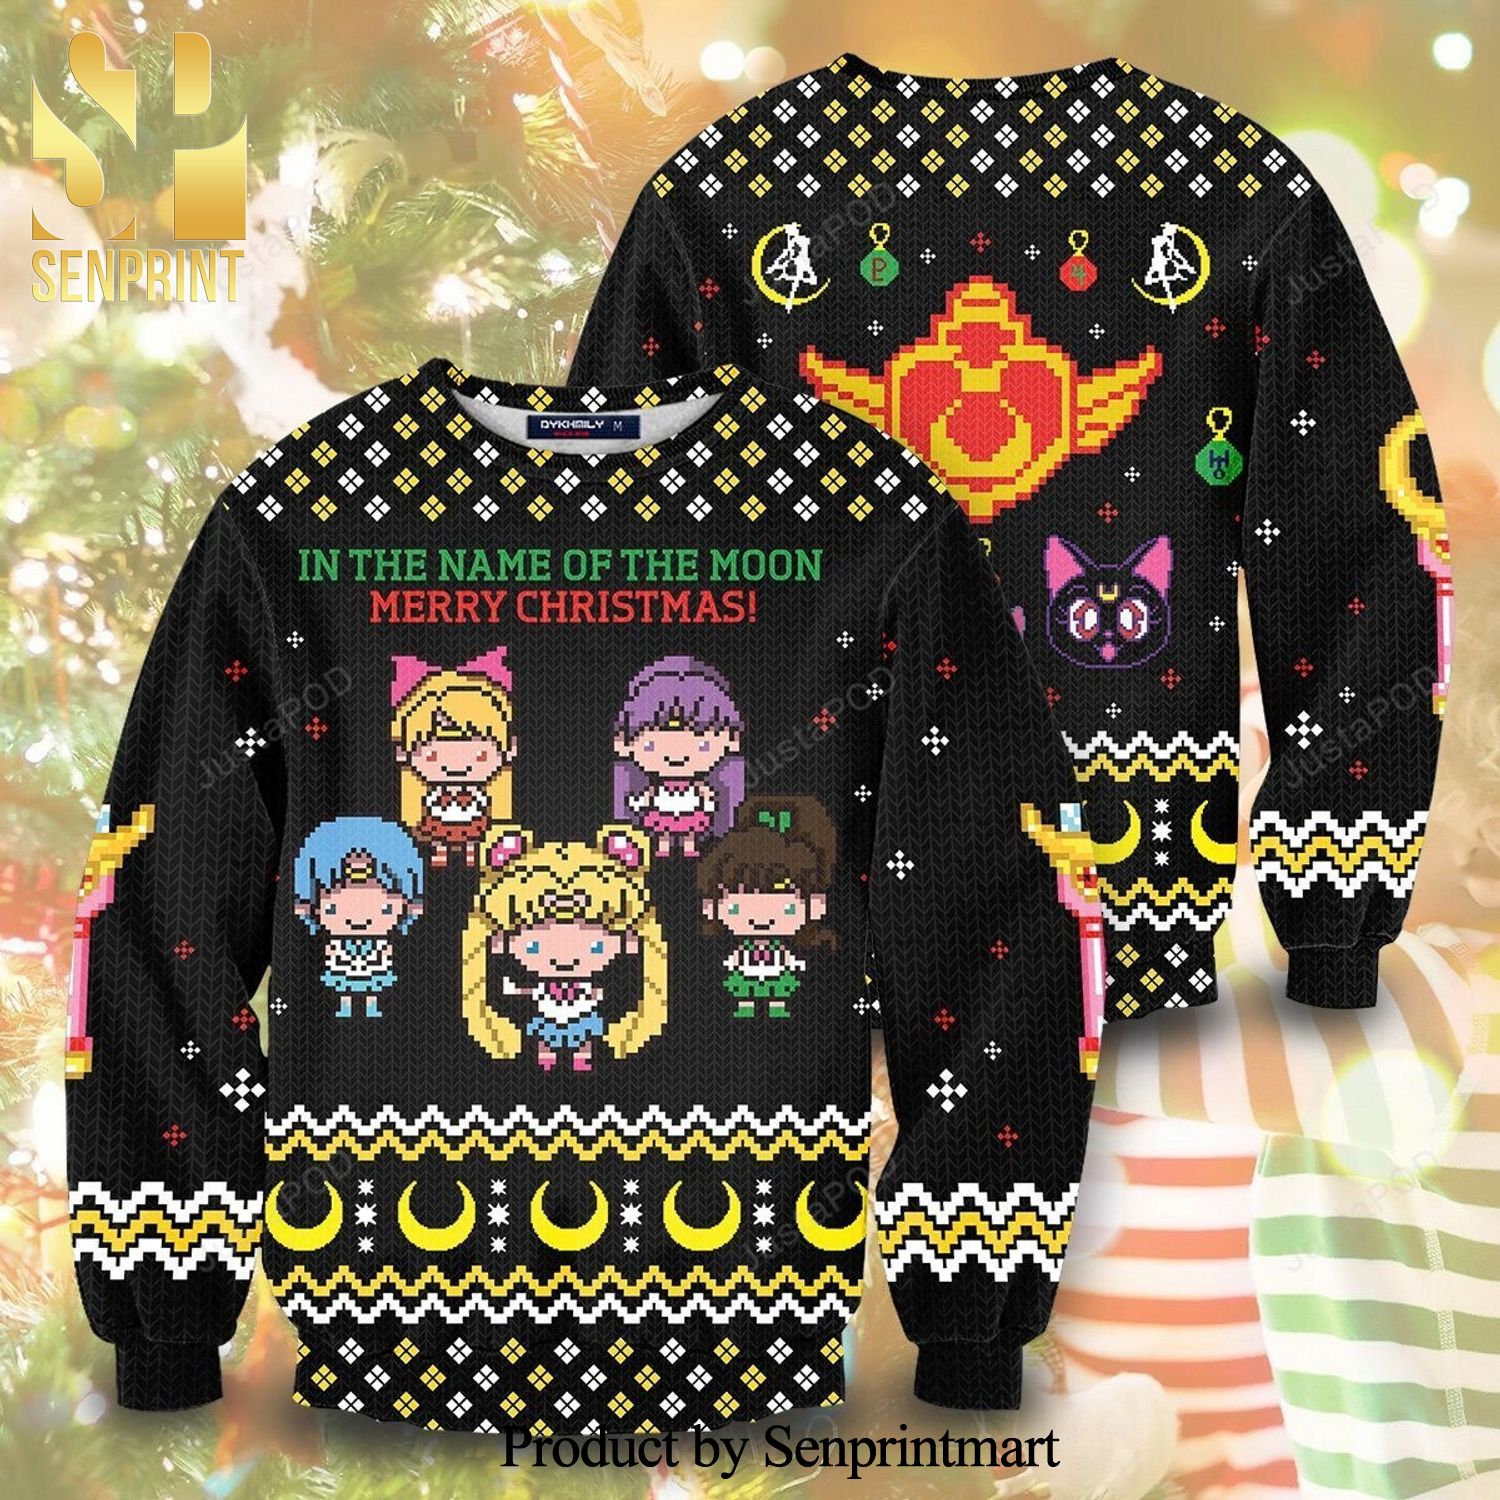 Chibi Characters In The Name Of The Moon Sailor Moon Manga Anime Knitted Ugly Christmas Sweater